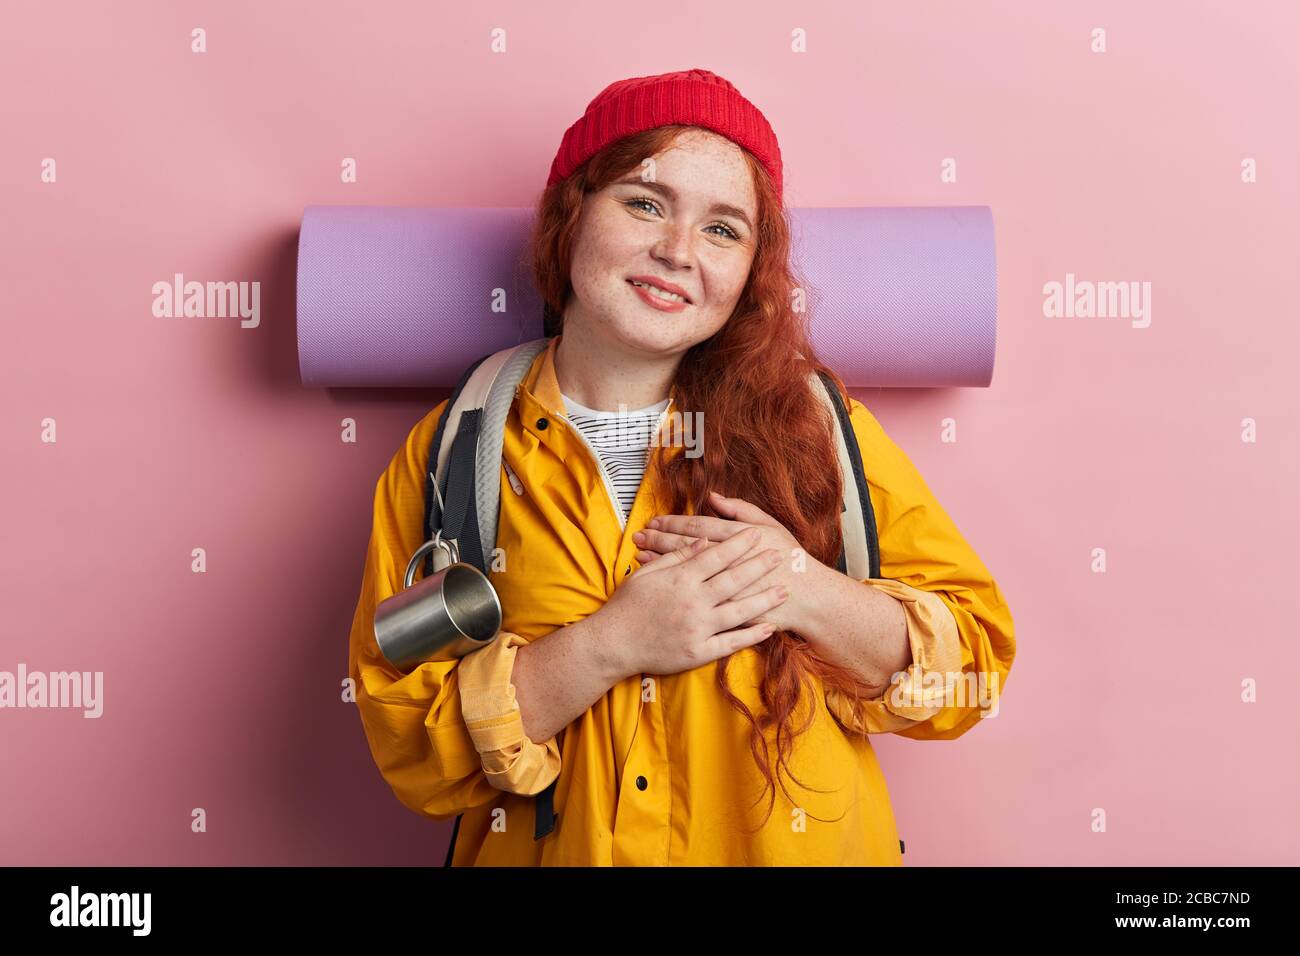 woman wearing rucksack, backpack, yellow coat, green shirt and red knitted  cap has friendly expression, pressing palm to chest. Love concept.thank you  Stock Photo - Alamy